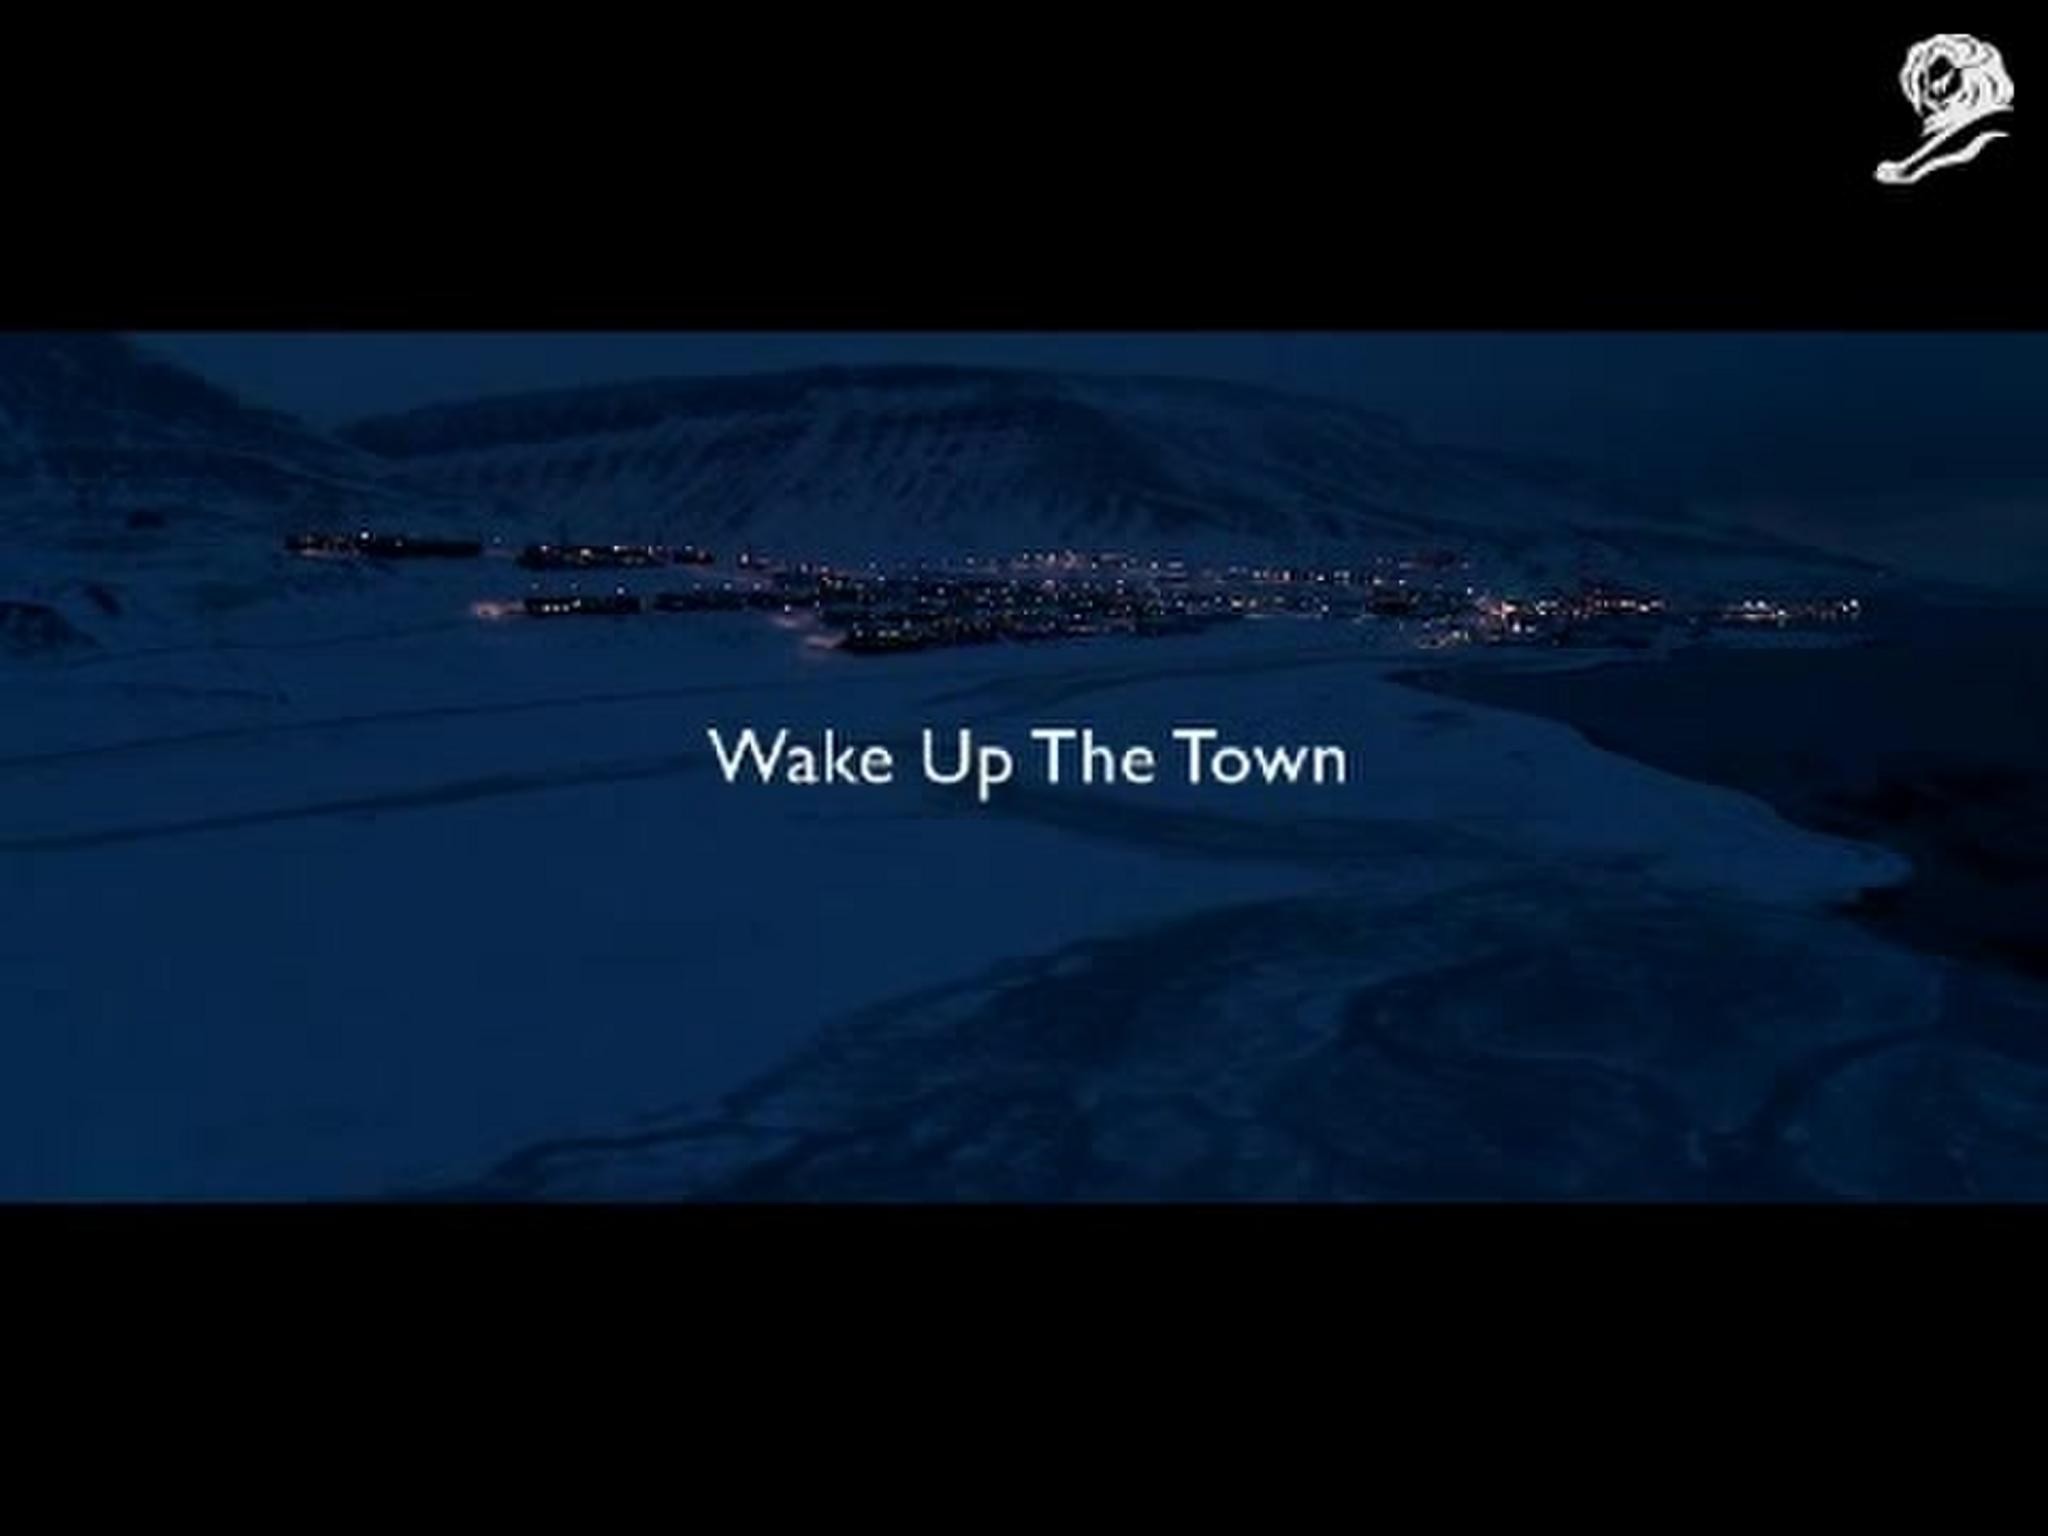 WAKE UP THE TOWN - ARCTIC EXPERIMENT